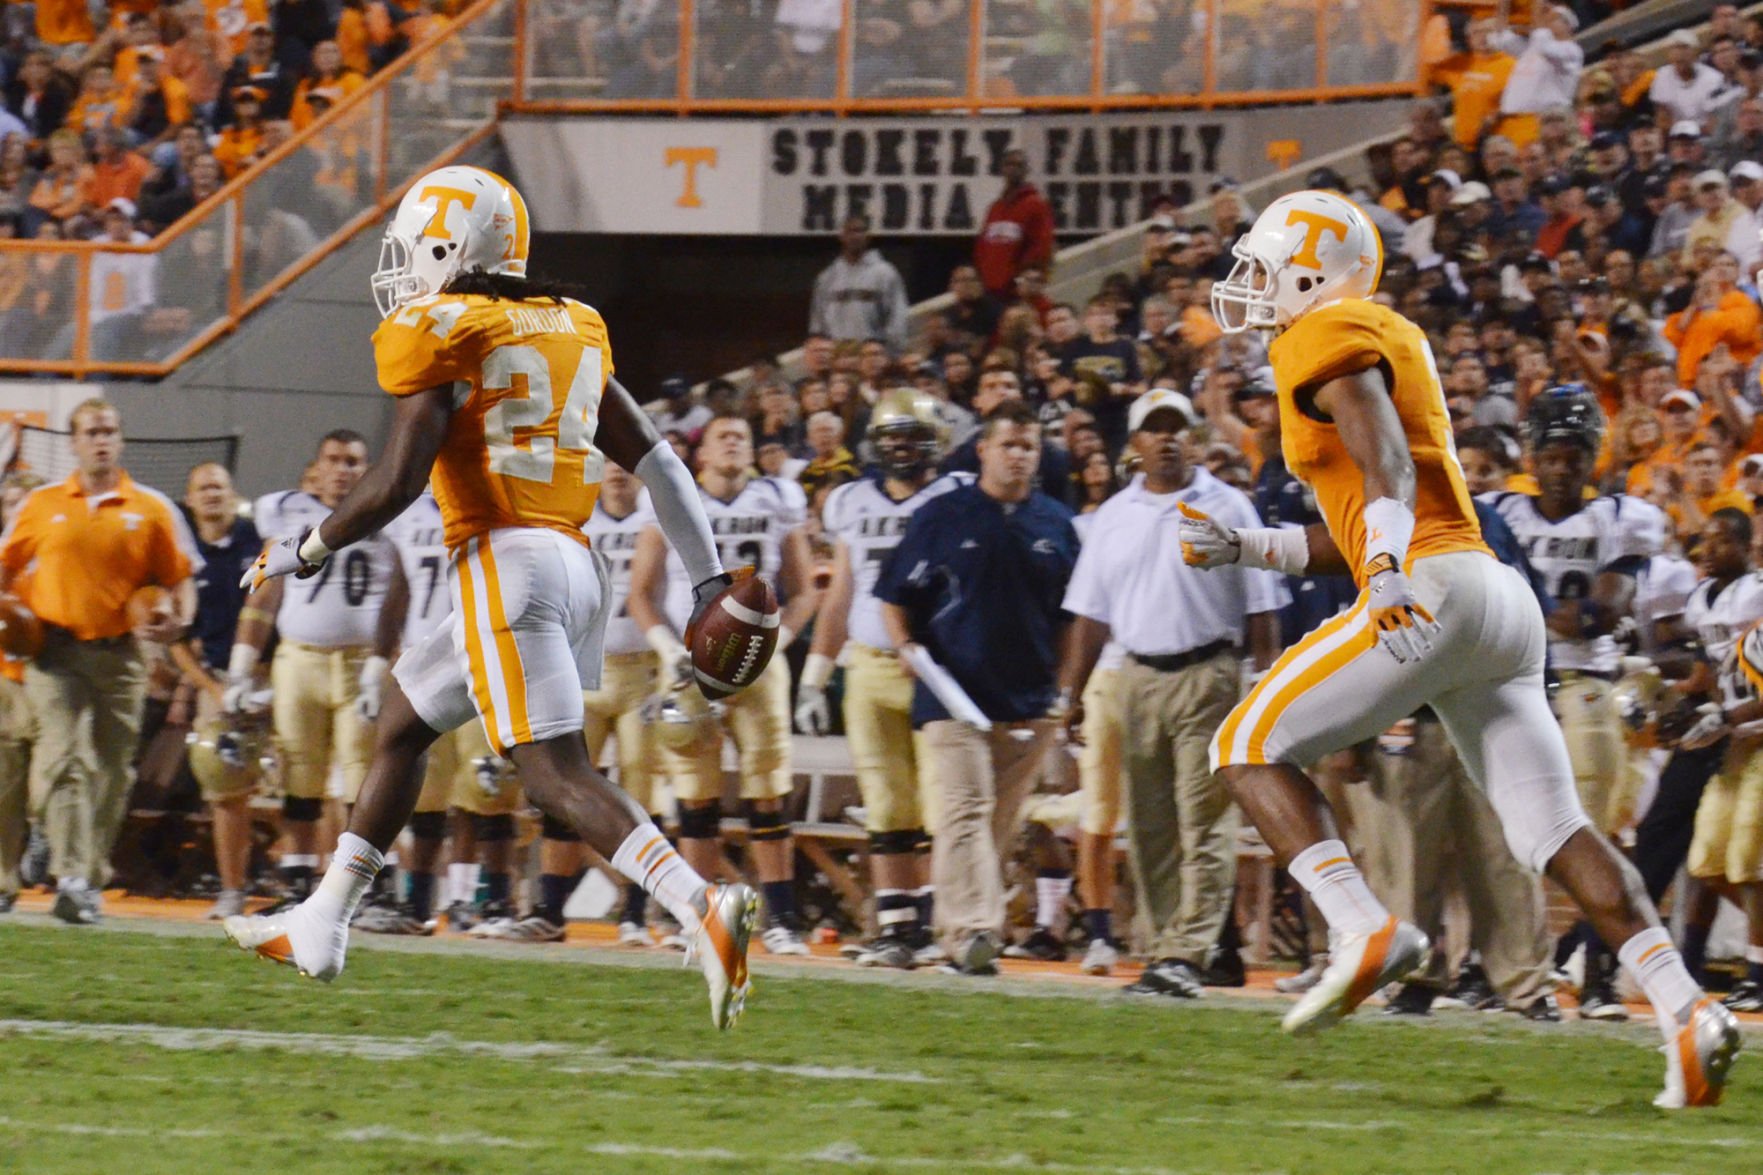 Vols 'maximize' kicking game for win over Akron | Sports